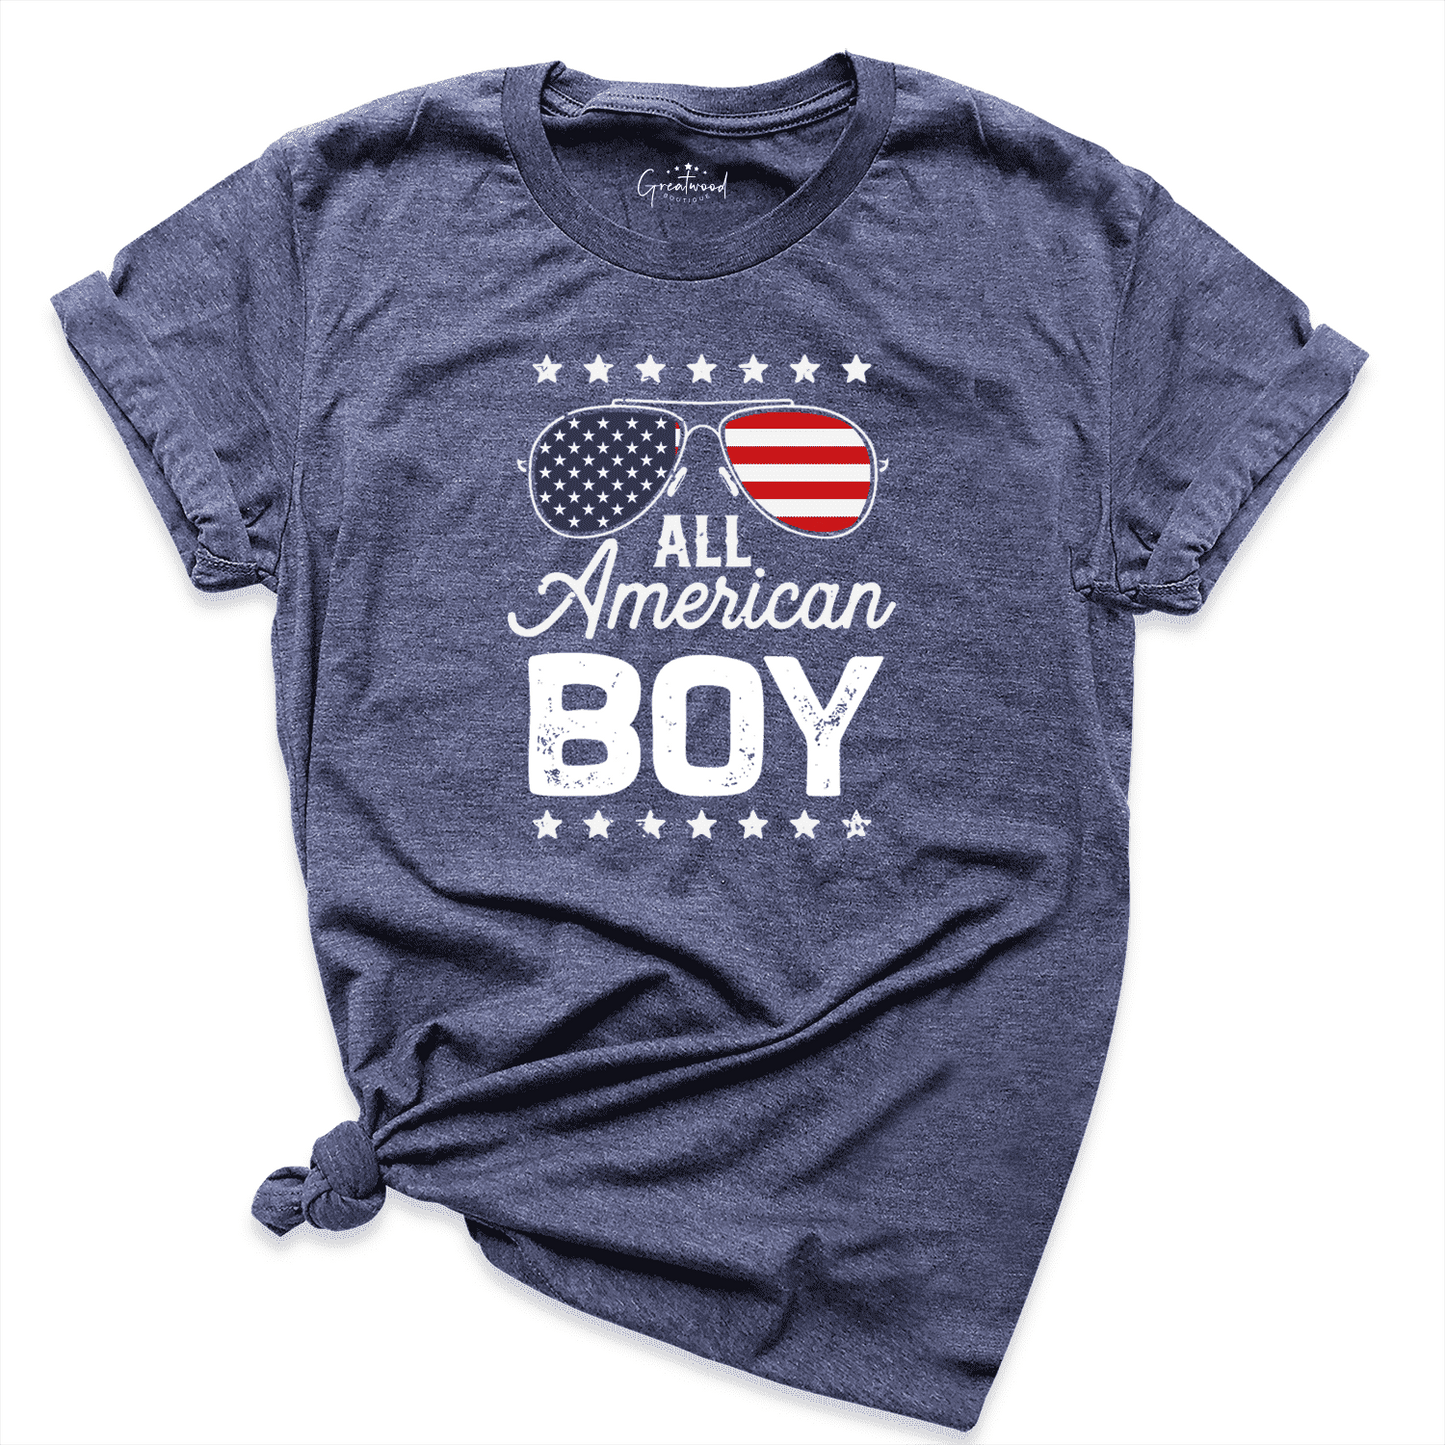 All American Boy Shirt Navy - Greatwood Boutique